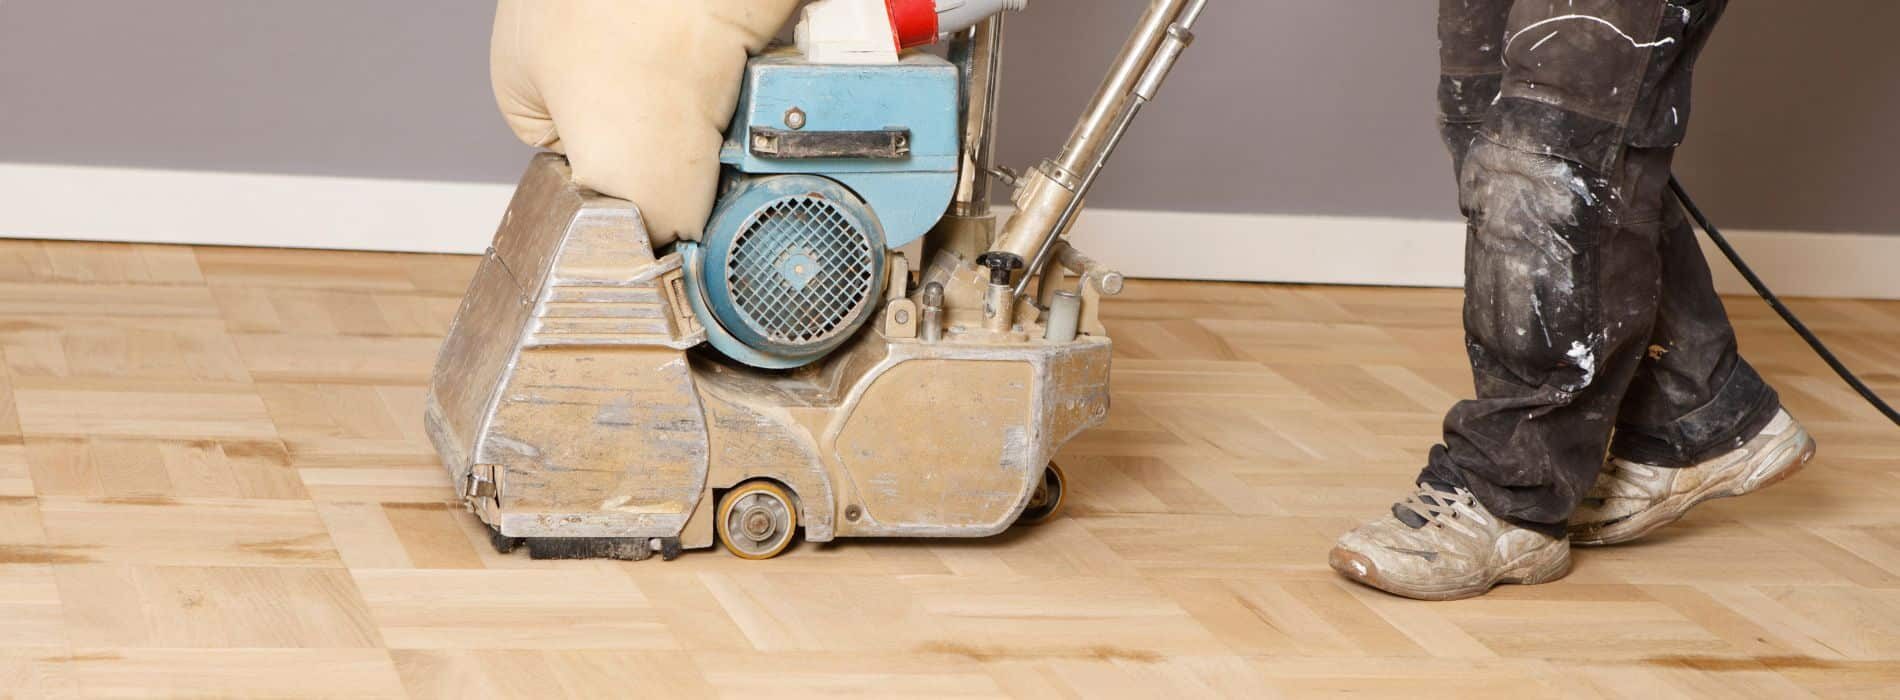 Mr Sander® are using a Bona Belt (2.2 kW) to sand a parquet floor in Tooting, SW17. This powerful belt sander (250x750 mm) operates at 230V and 50 Hz/60 Hz frequency. It is connected to a dust extraction system with a HEPA filter for a clean and efficient outcome. 